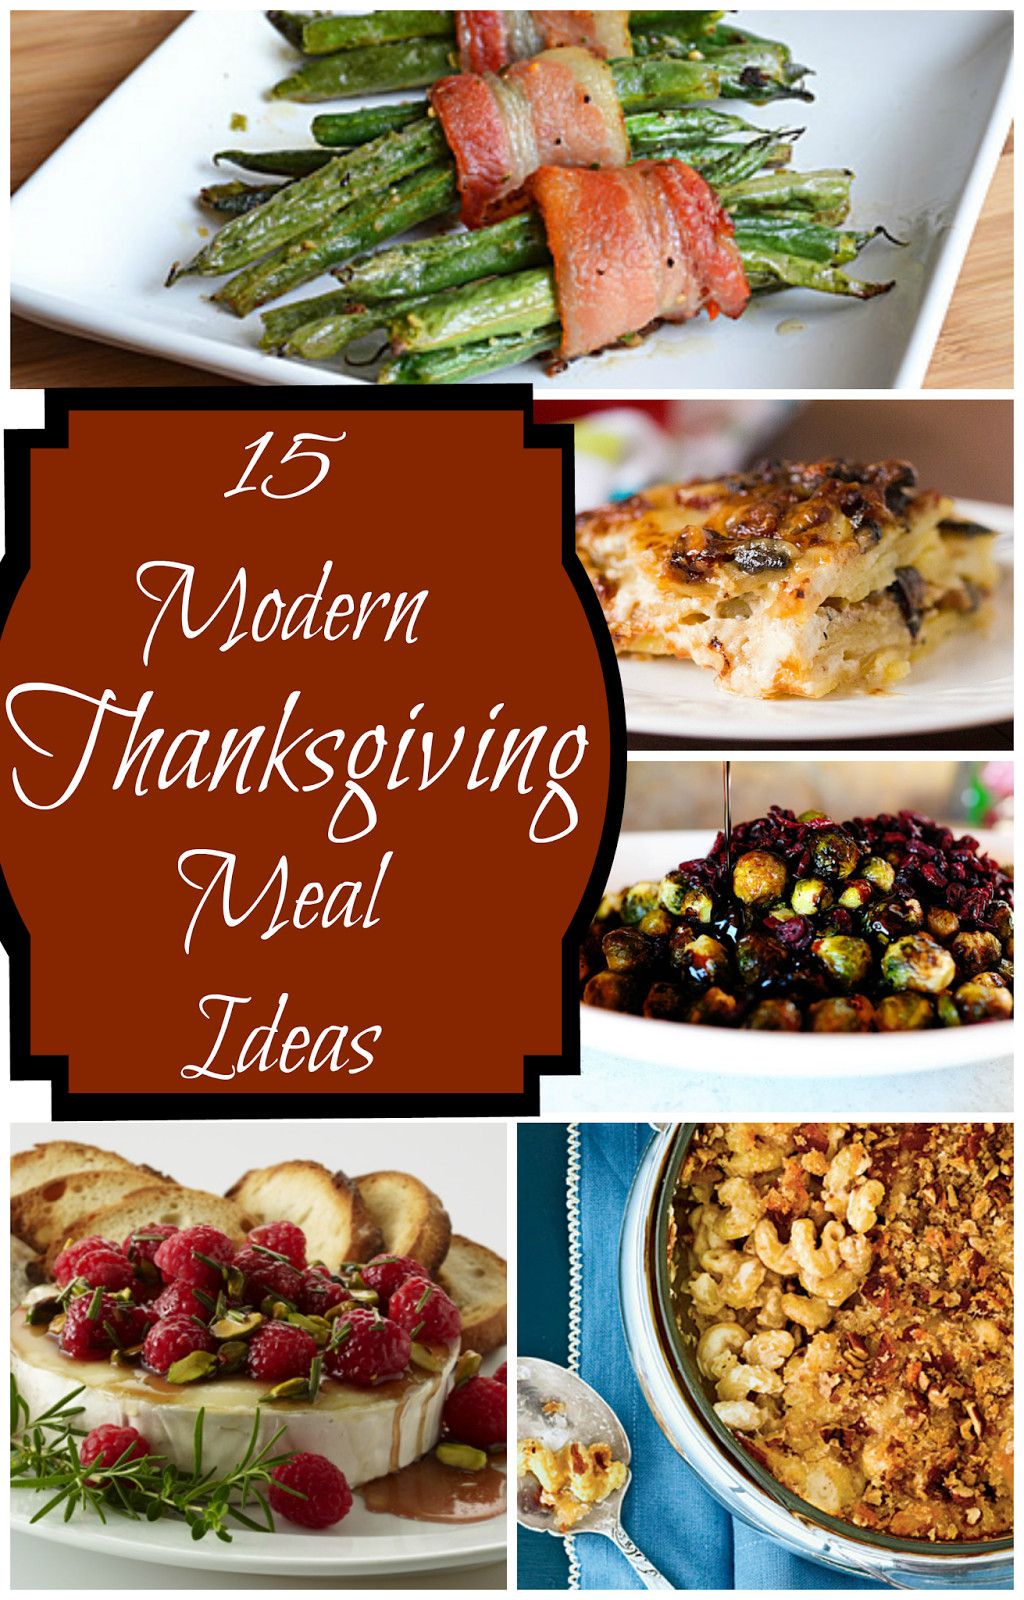 Ideas For Thanksgiving Dinner
 Not Your Mother s Recipes 15 Modern Thanksgiving Meal